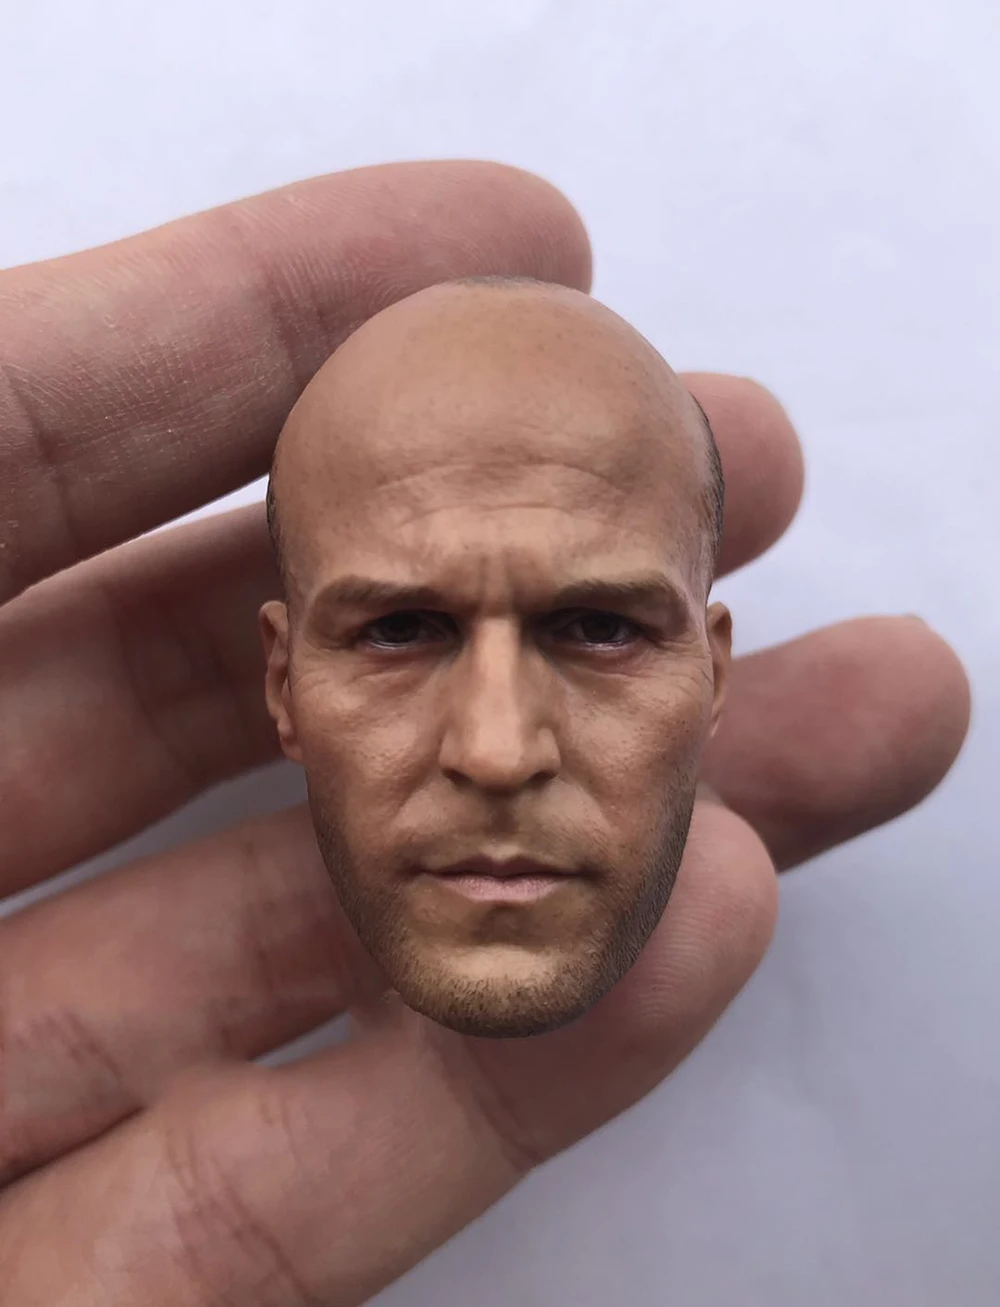 

For Sale 1/6 Male Hero Series Expendables Jason Head Sculpture Carving For 12inch Action Figures